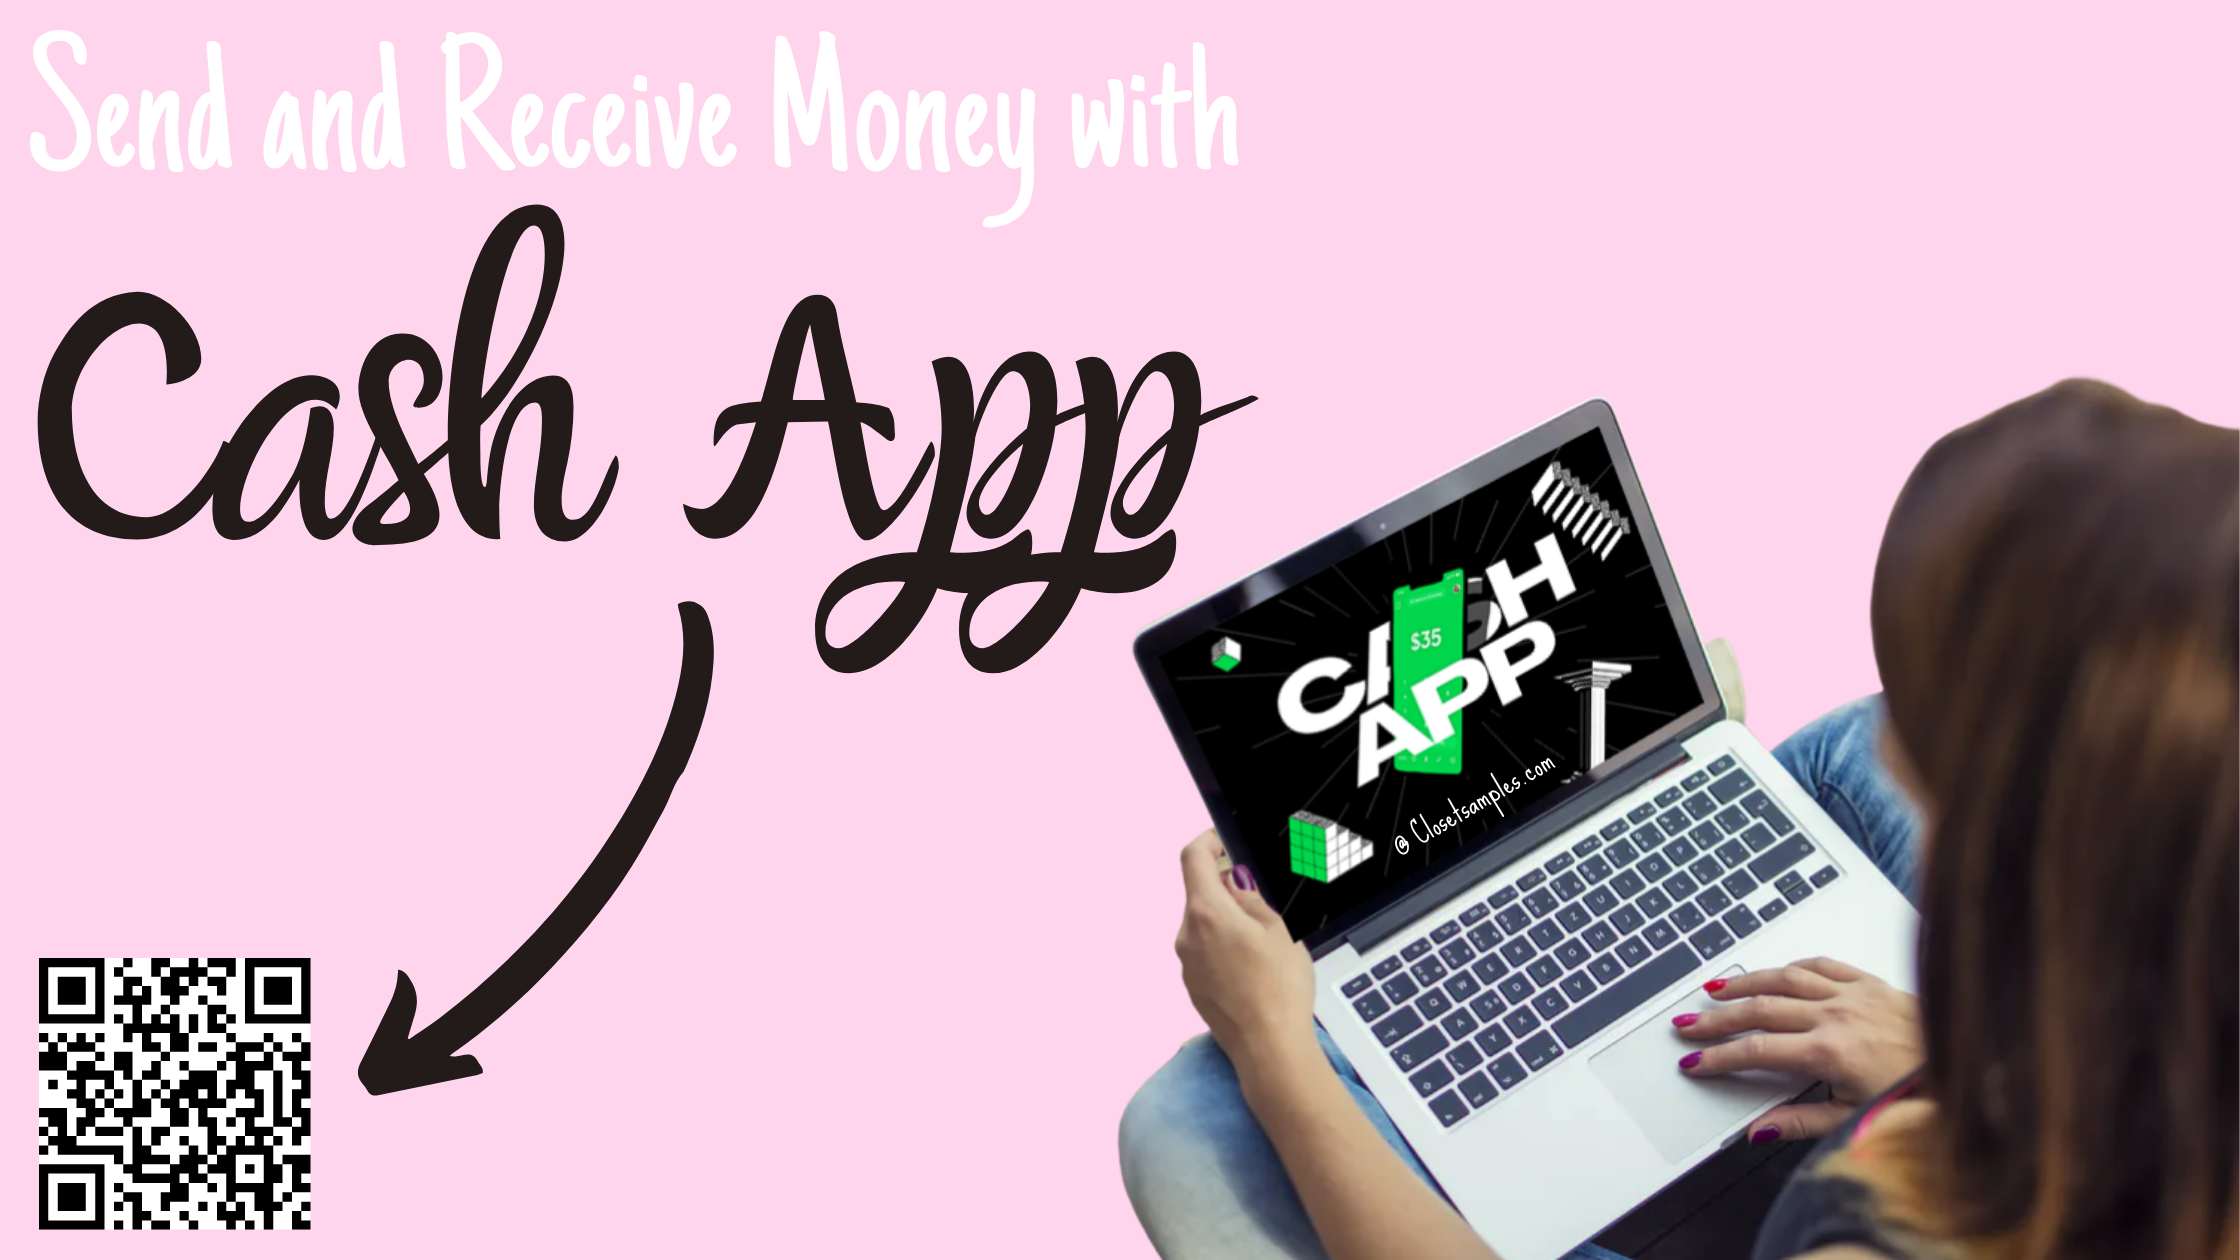 Send and Receive Money with Cash App